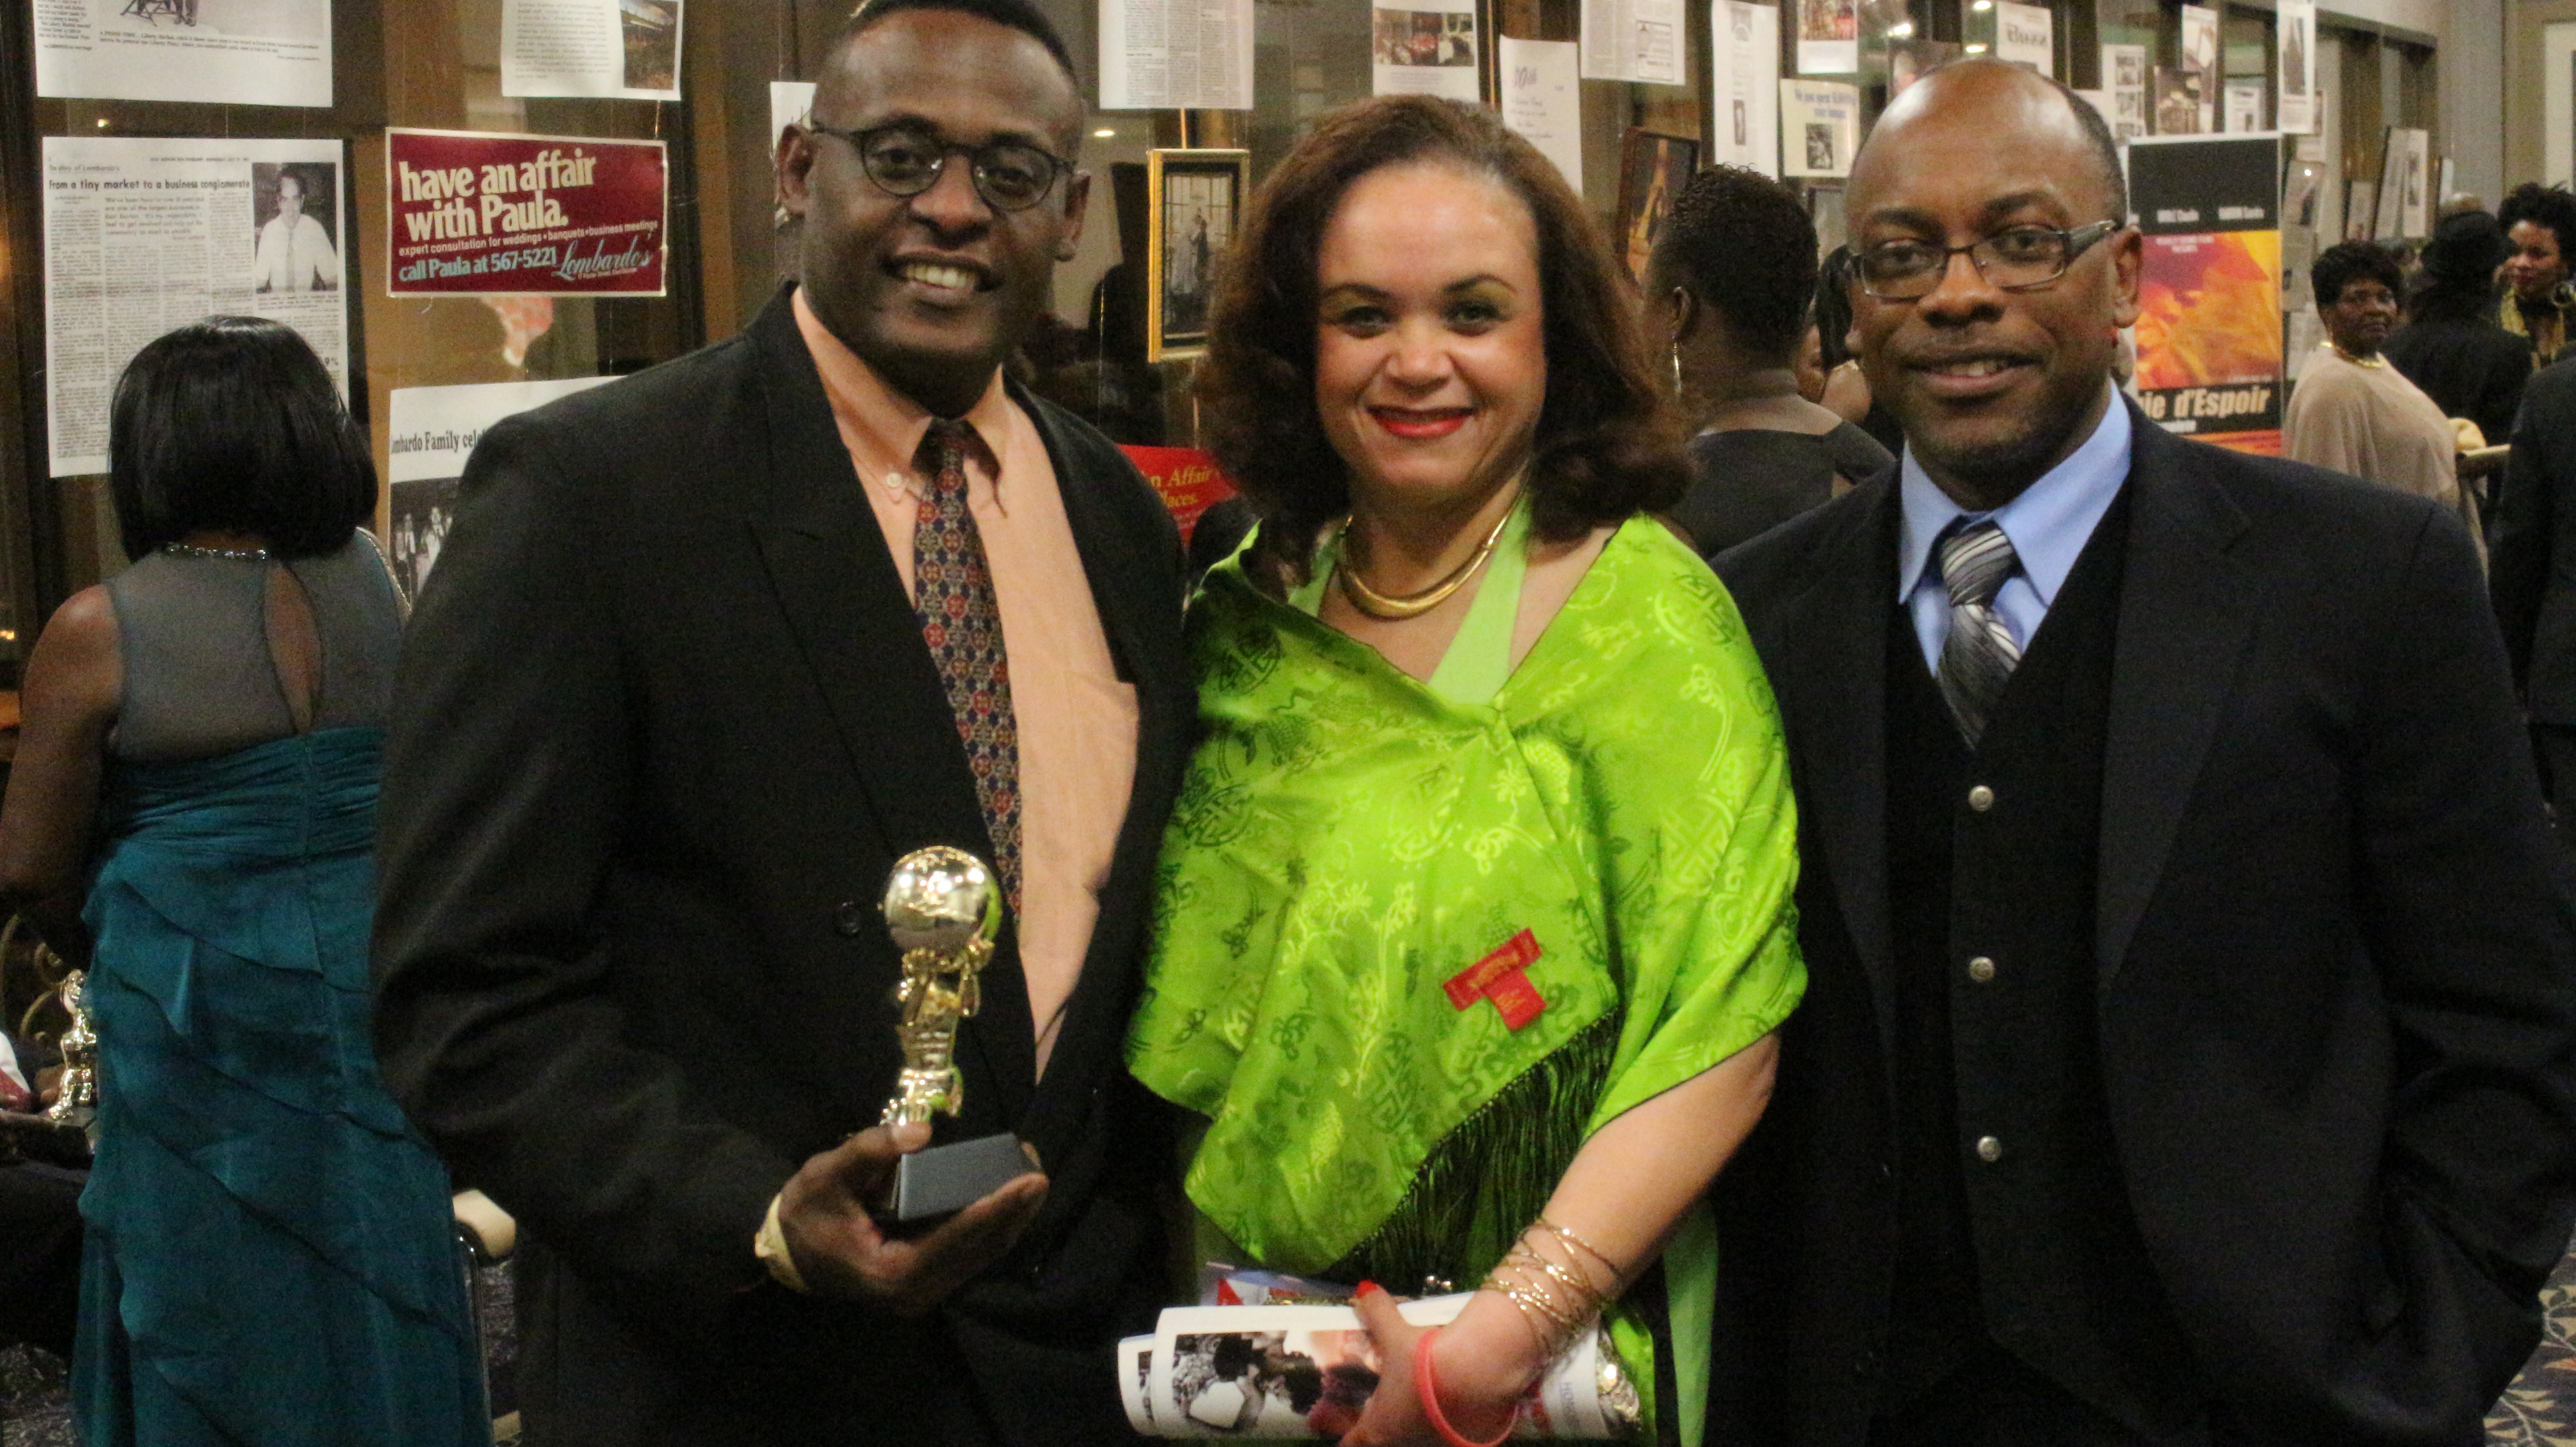 Patrick Jerome, Charlot Lucien and friend at The Motion Picture Association of Haiti Awards in Boston November 24, 2013